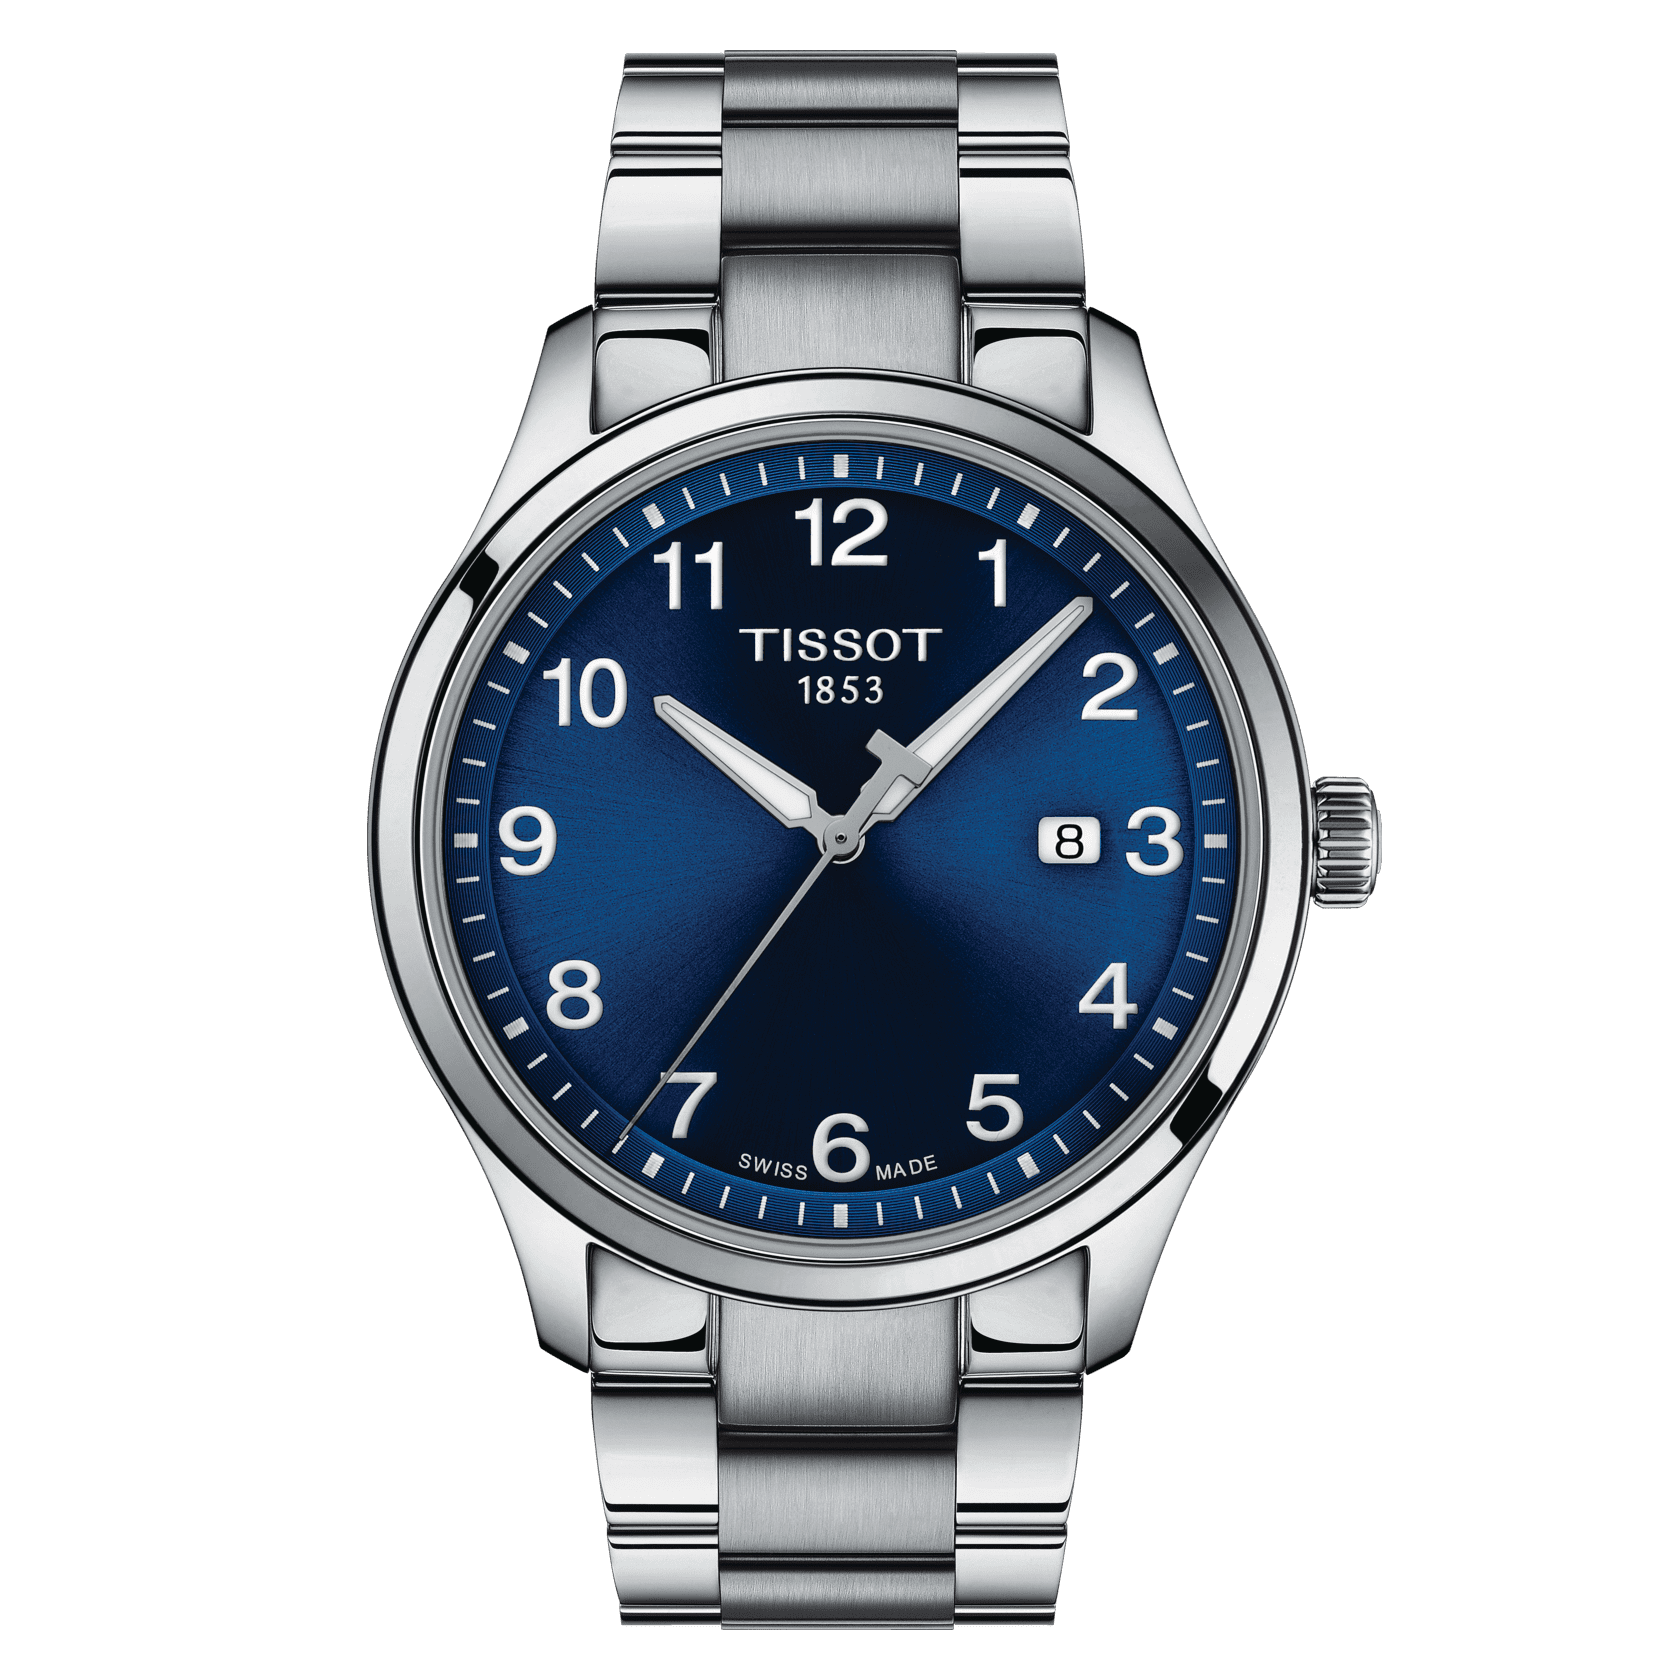 TISSOT GENT XL CLASSIC QUARTZ (T116.410.11.047.00)
Case 42mm/316L stainless steel case
Crystal Scratch-resistant sapphire crystal
Movement Swiss quartz/ETA F06.115
Functions EOL (battery end-of-life indicator)
Dial Blue with arabic and indexes
Strap